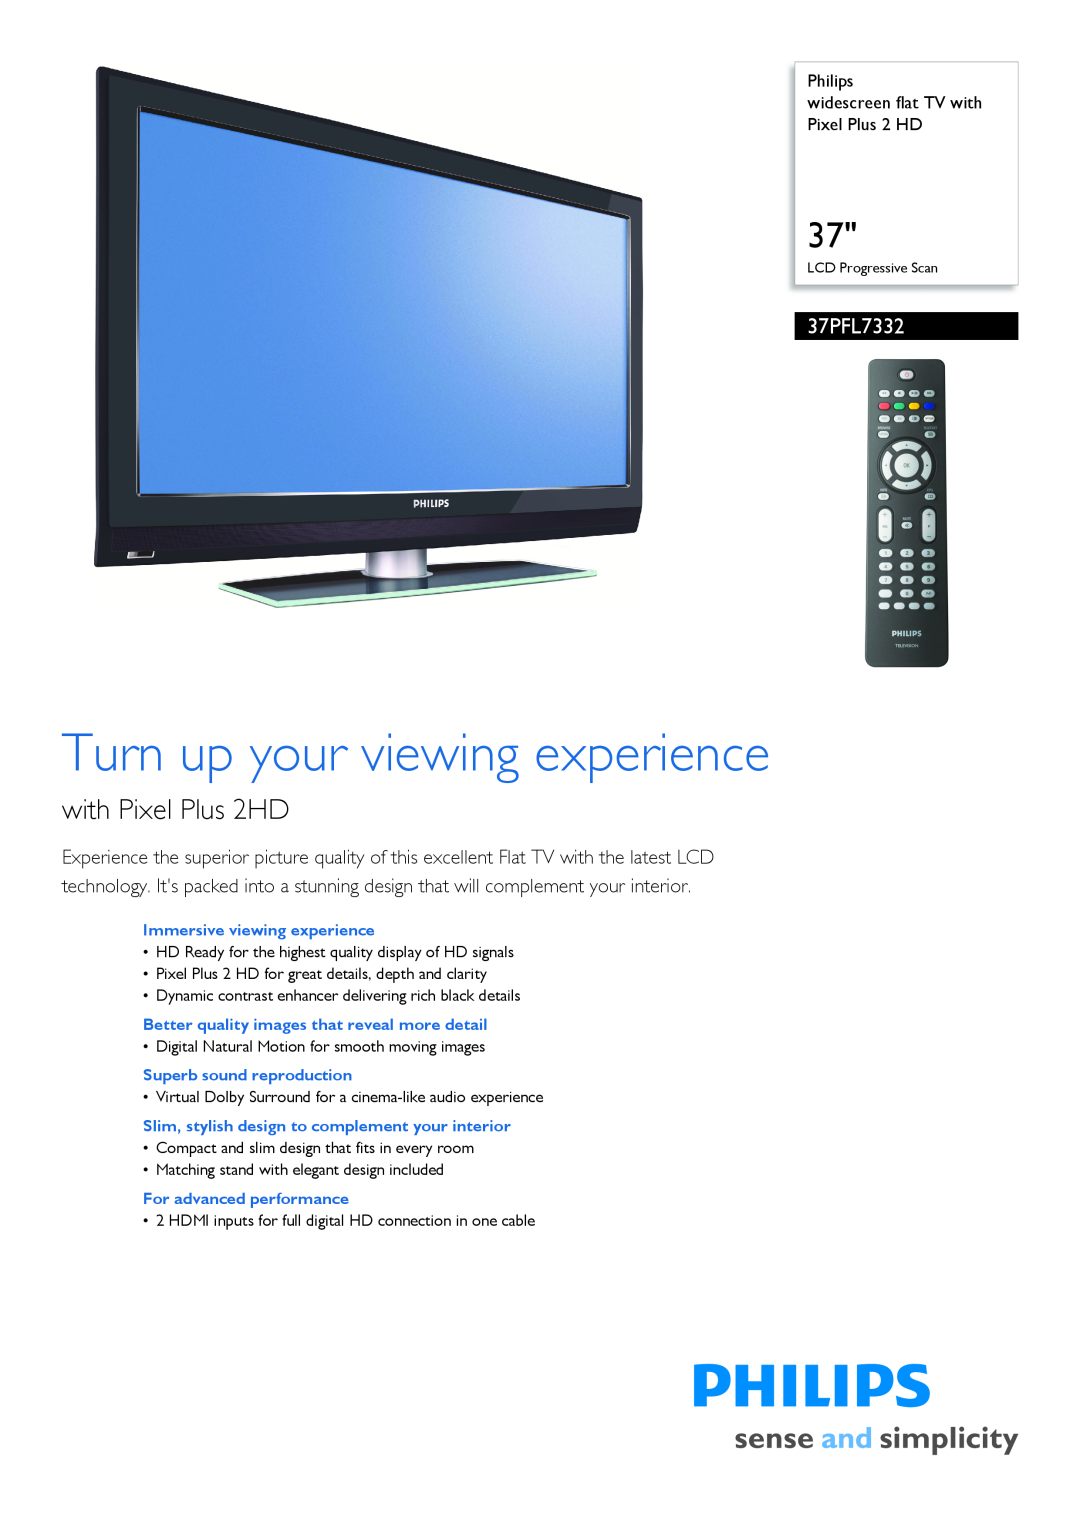 Philips 37PFL7332/10 manual Philips widescreen flat TV with Pixel Plus 2 HD, Immersive viewing experience 